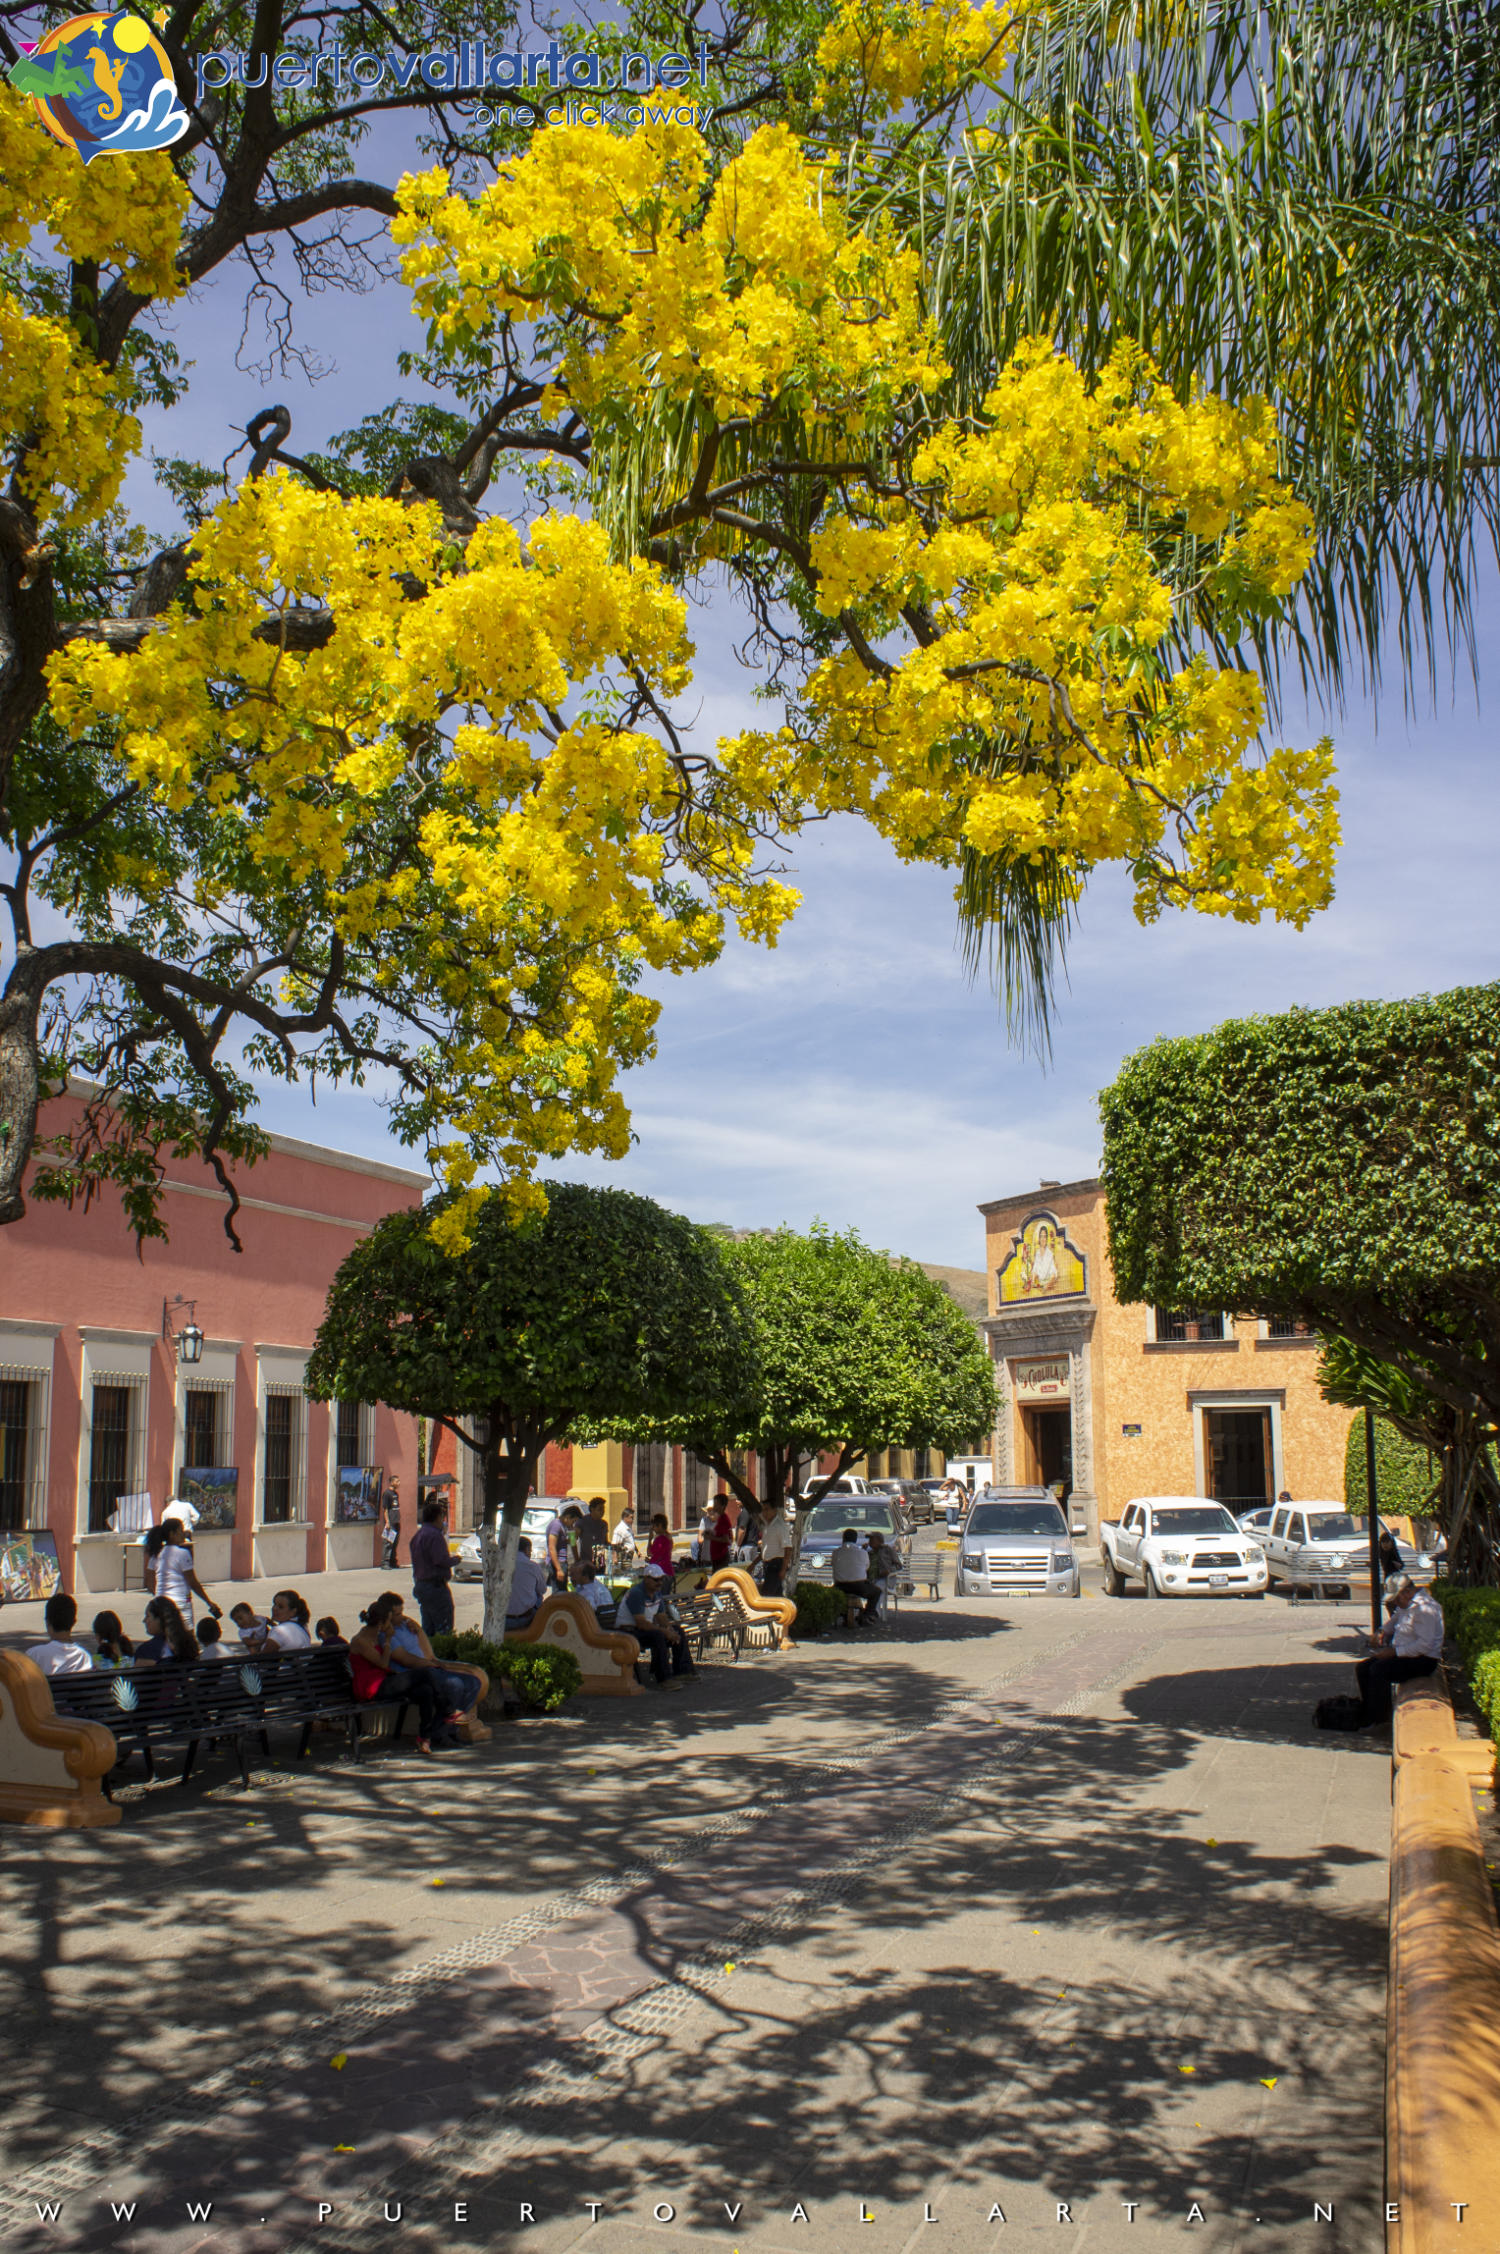 Main Square of Tequila